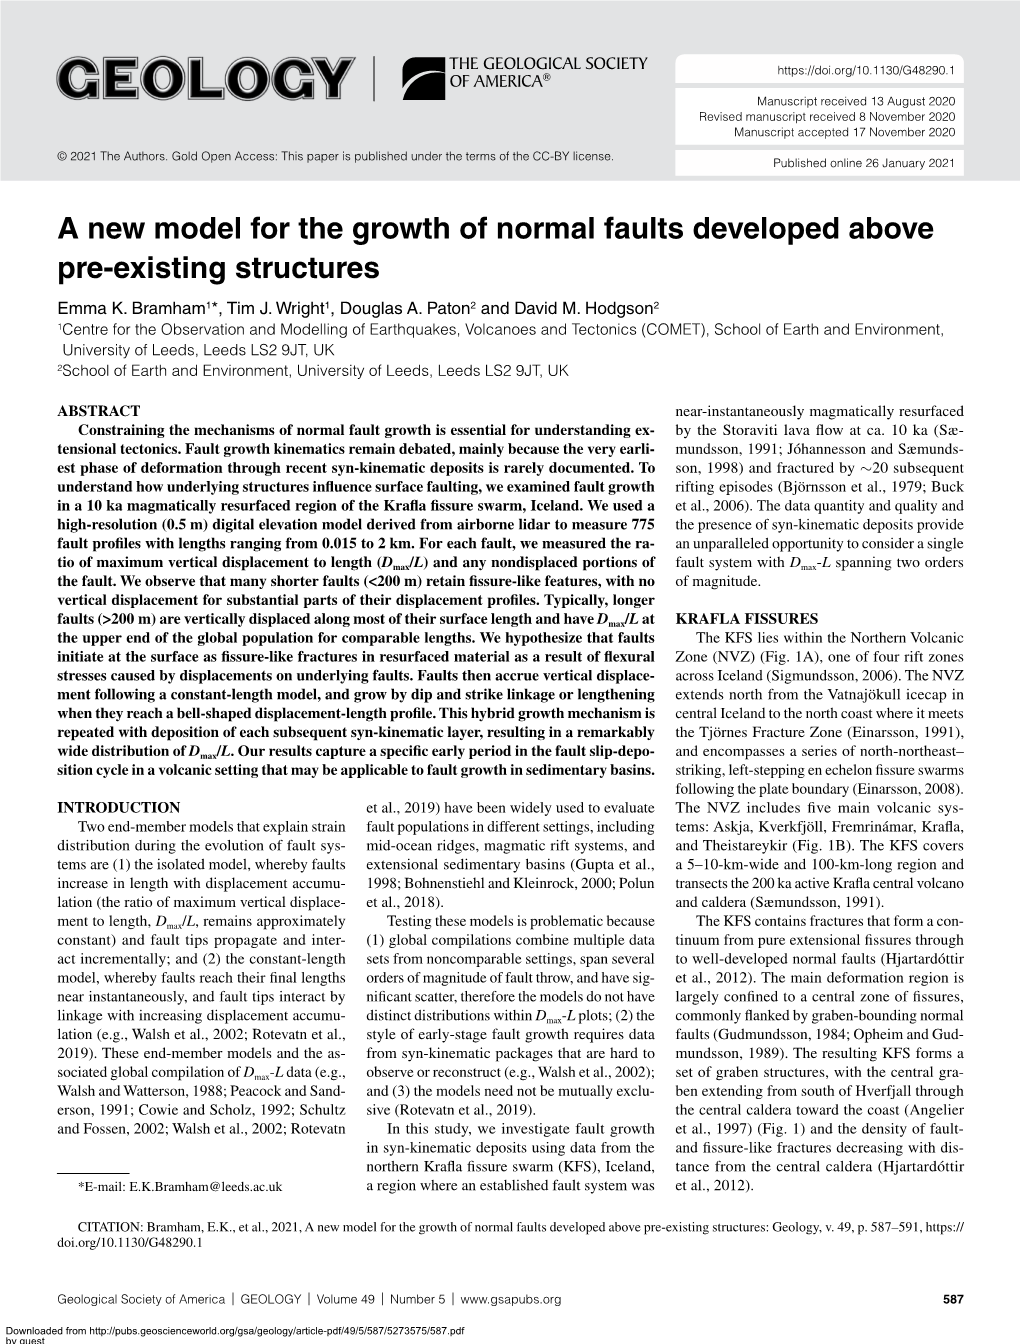 A New Model for the Growth of Normal Faults Developed Above Pre-Existing Structures Emma K